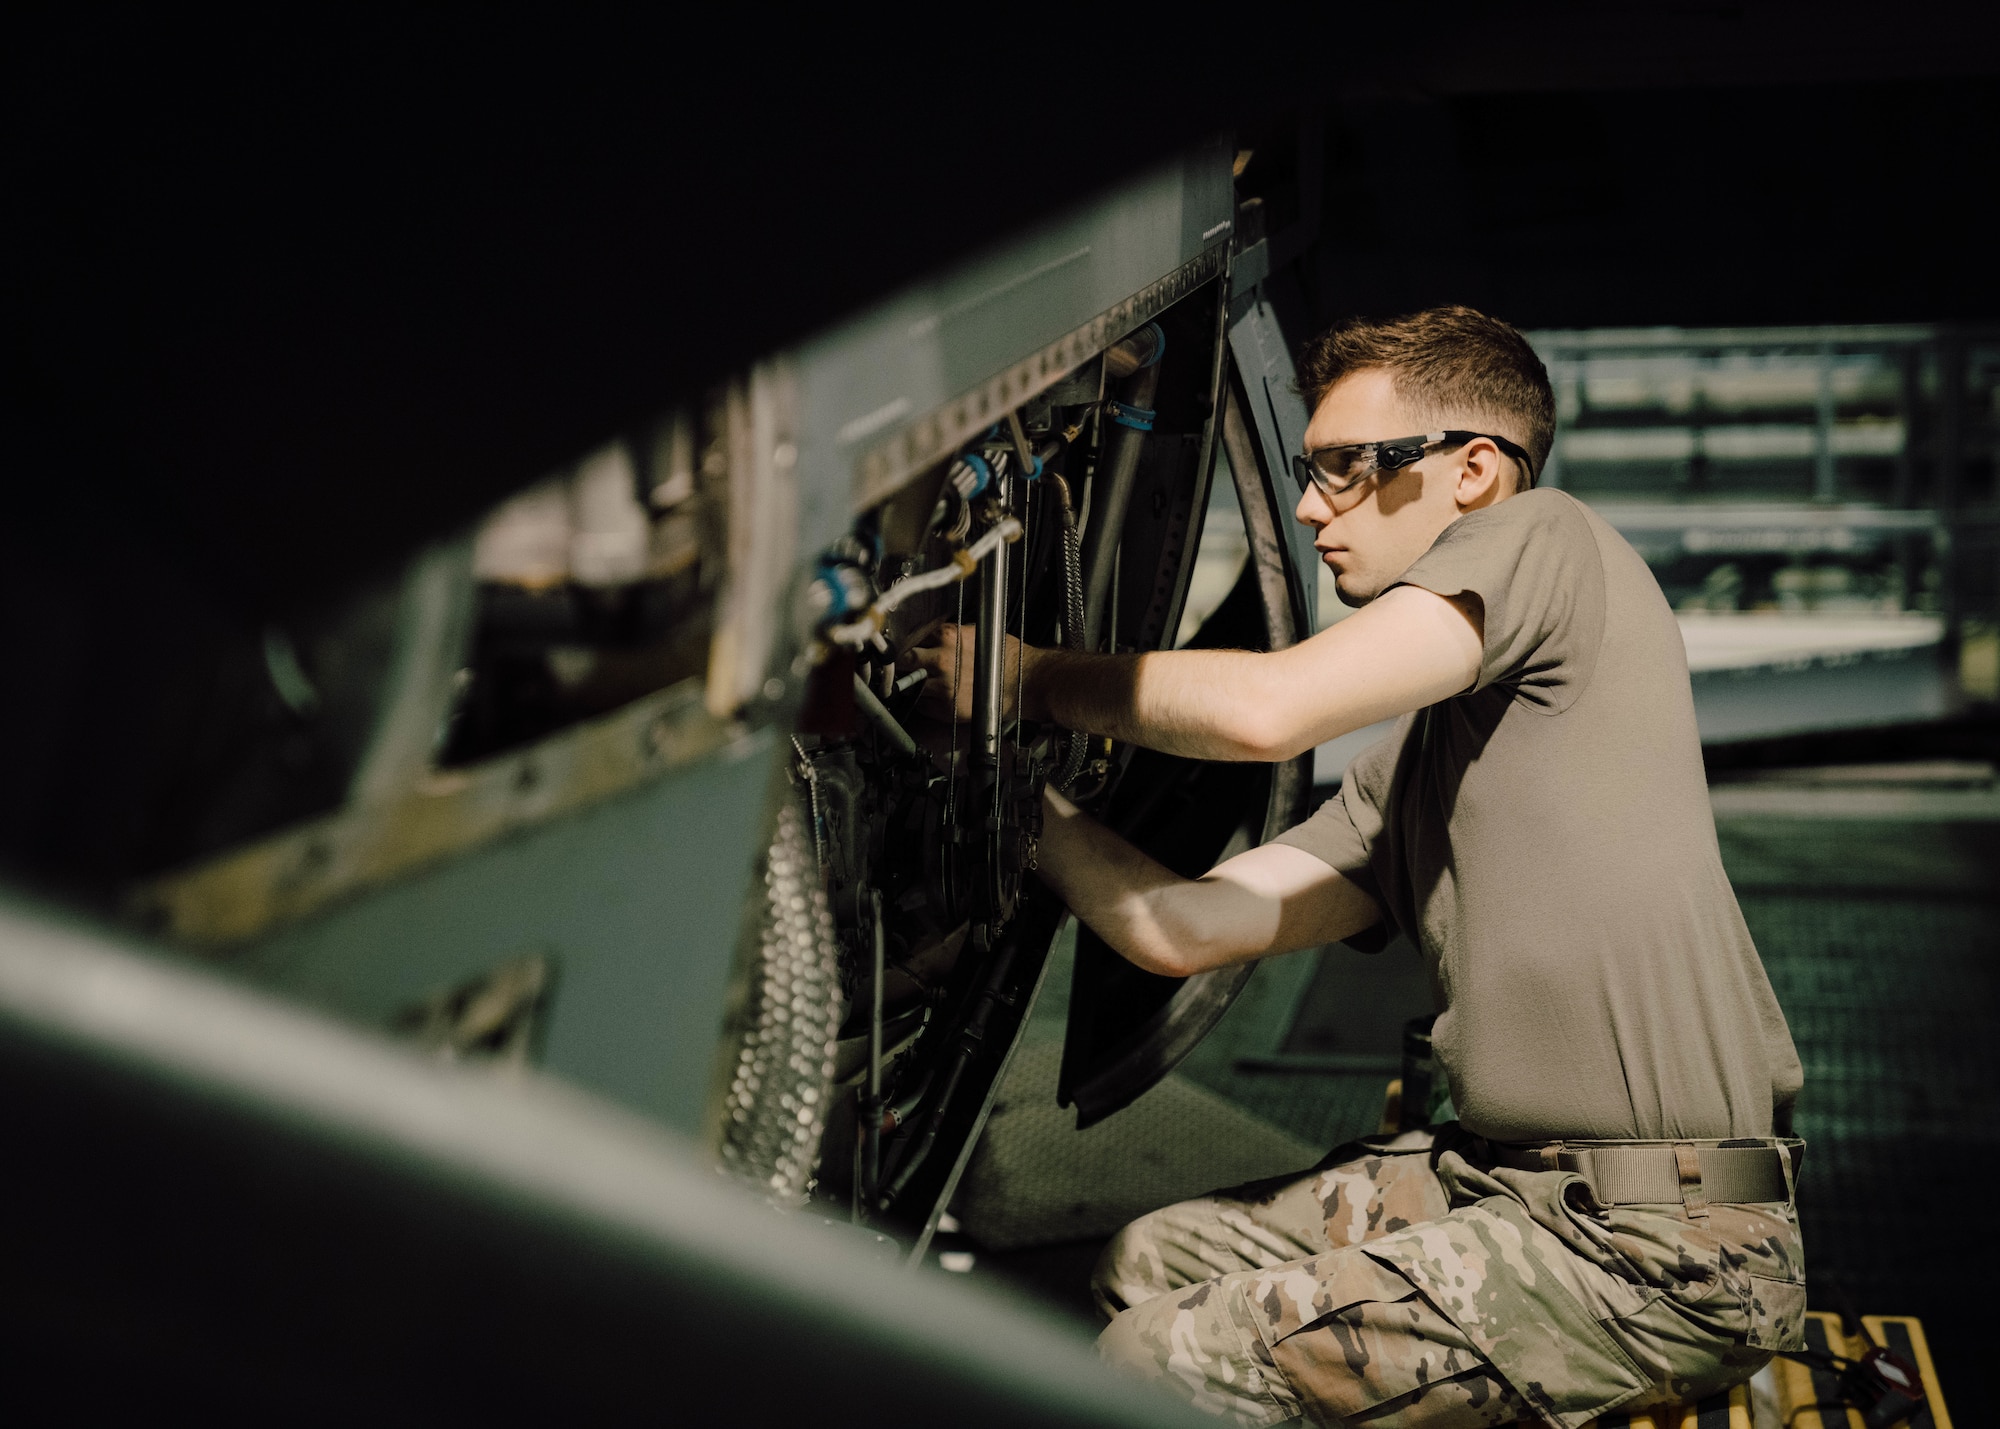 a person in military uniform perform maintenance on an aircraft